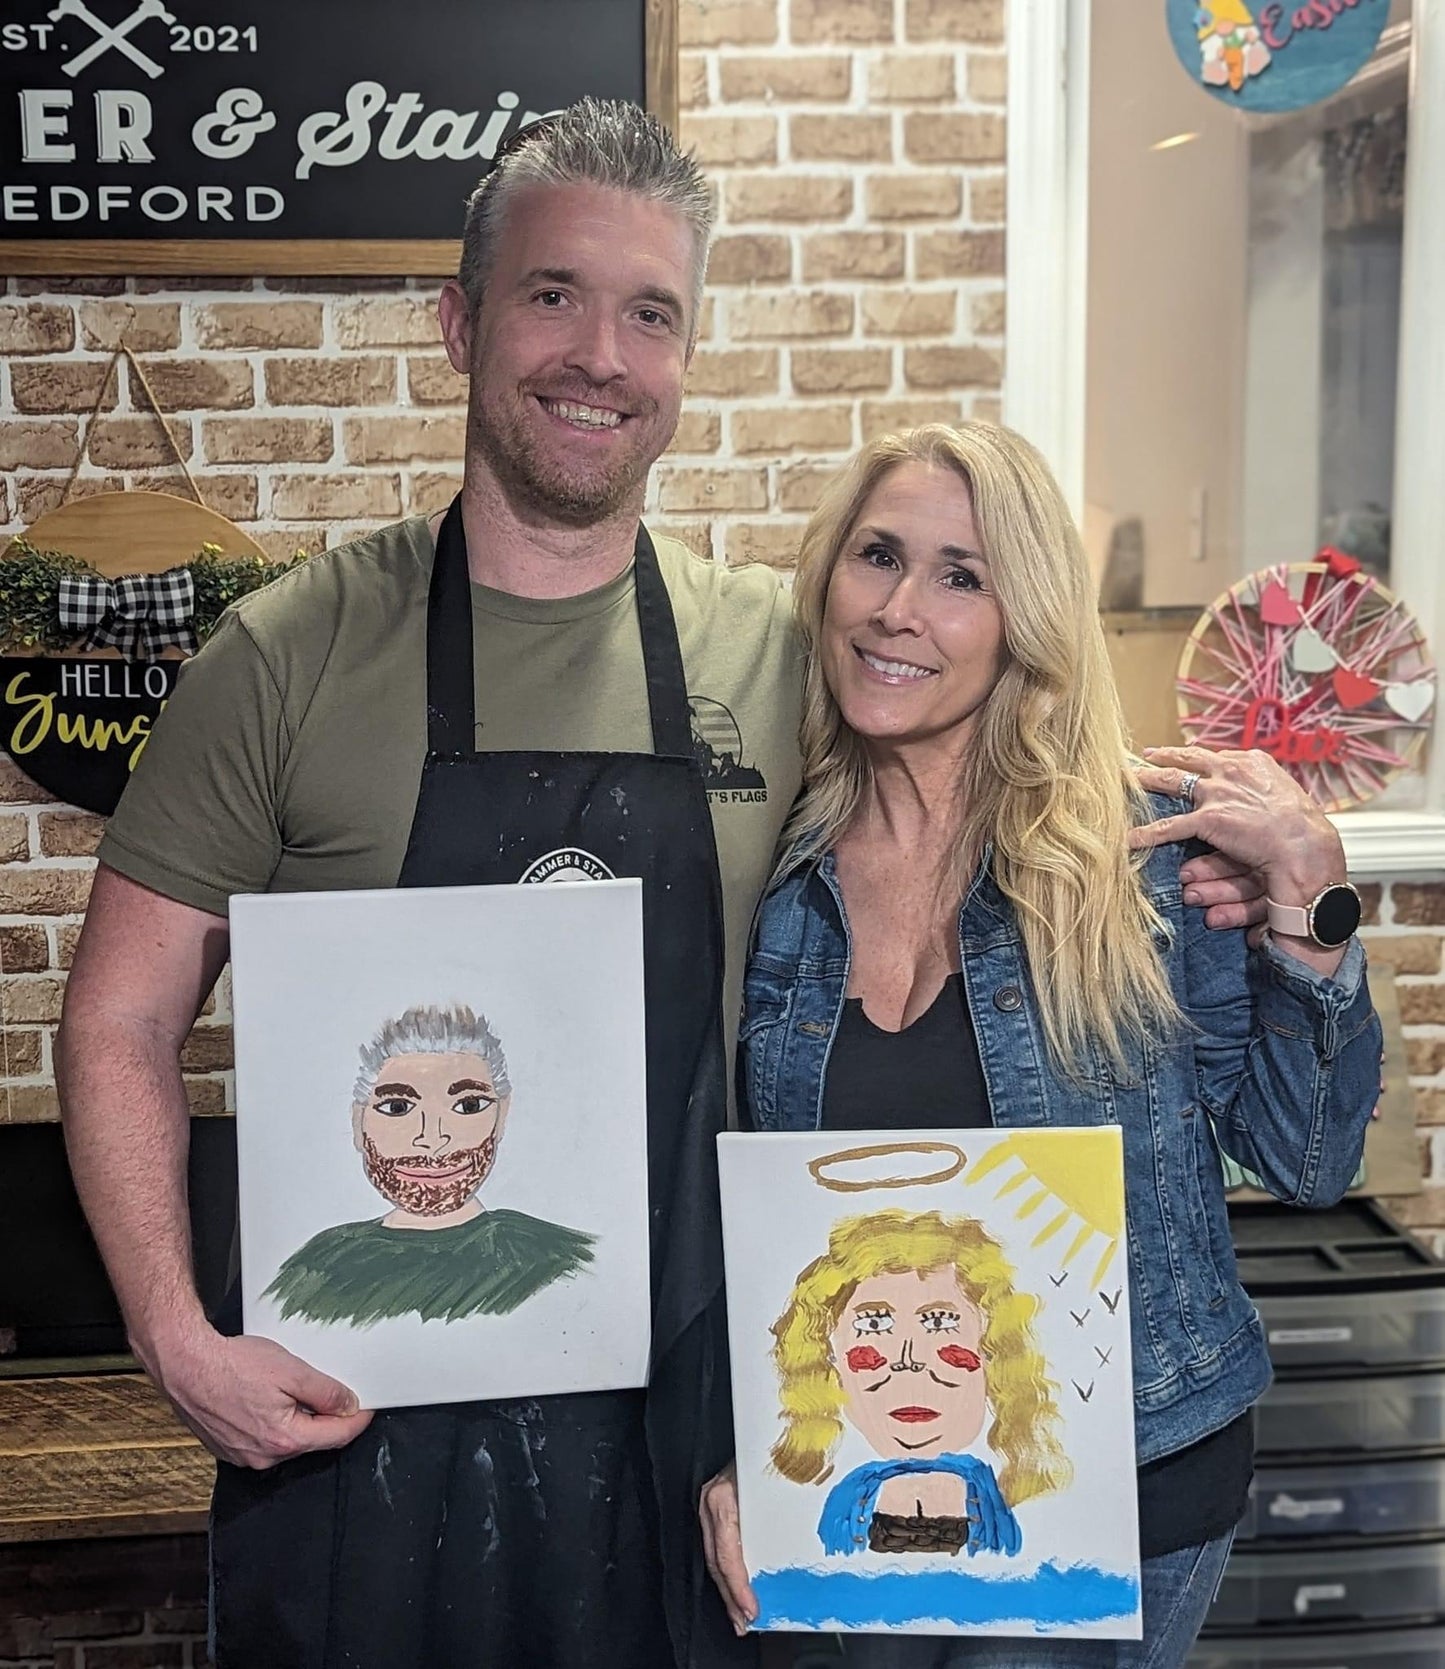 Paint Your Partner Date Night: May 18 at 6pm with Bingo